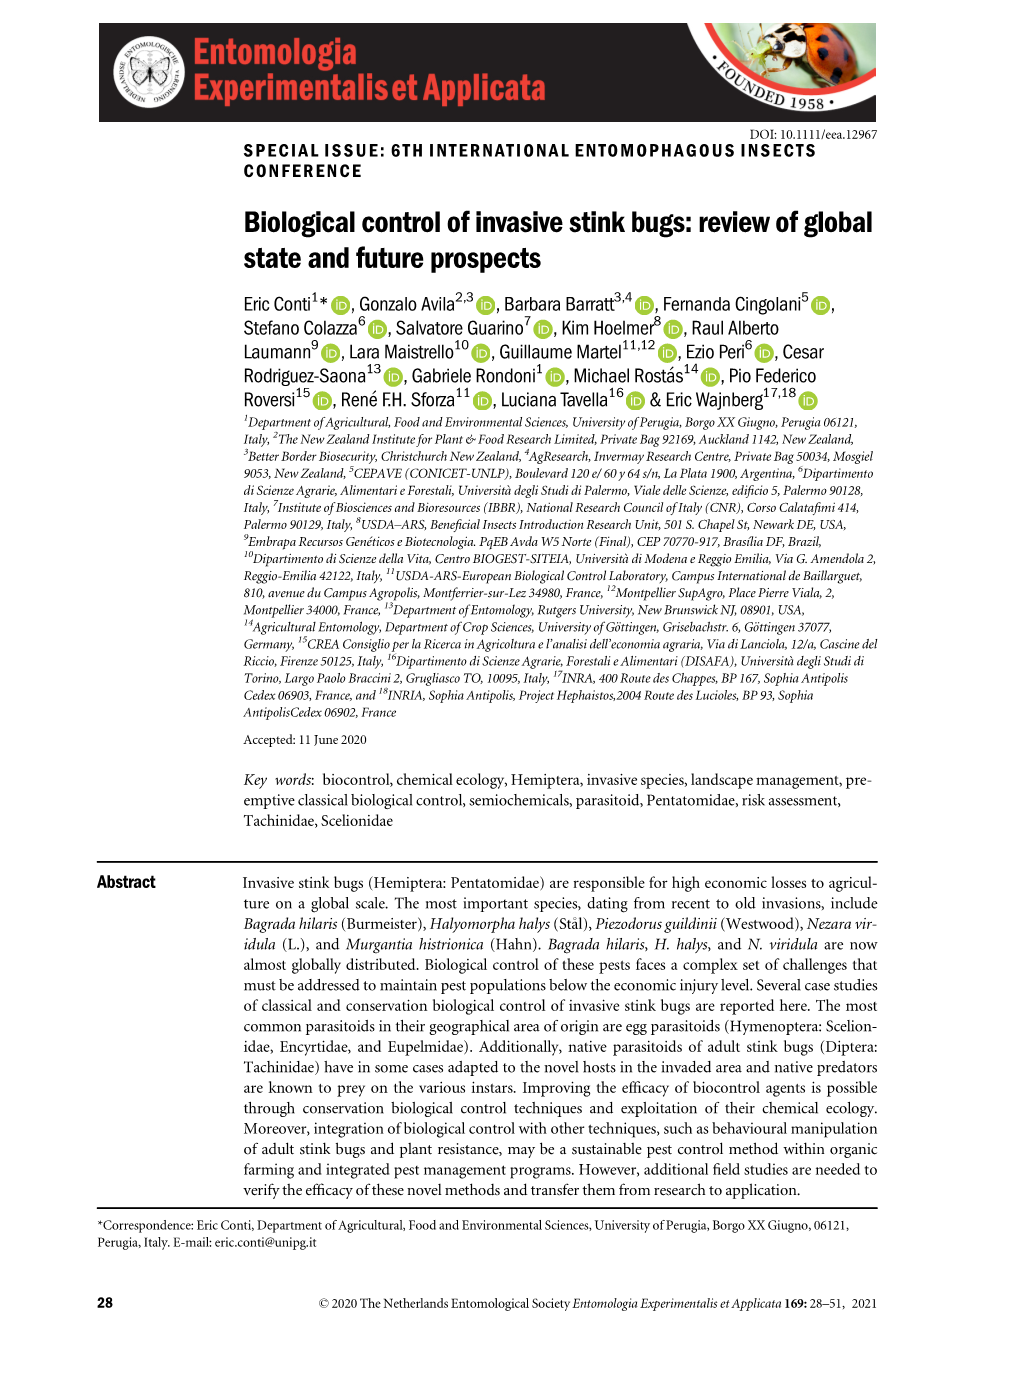 Biological Control of Invasive Stink Bugs: Review of Global State and Future Prospects